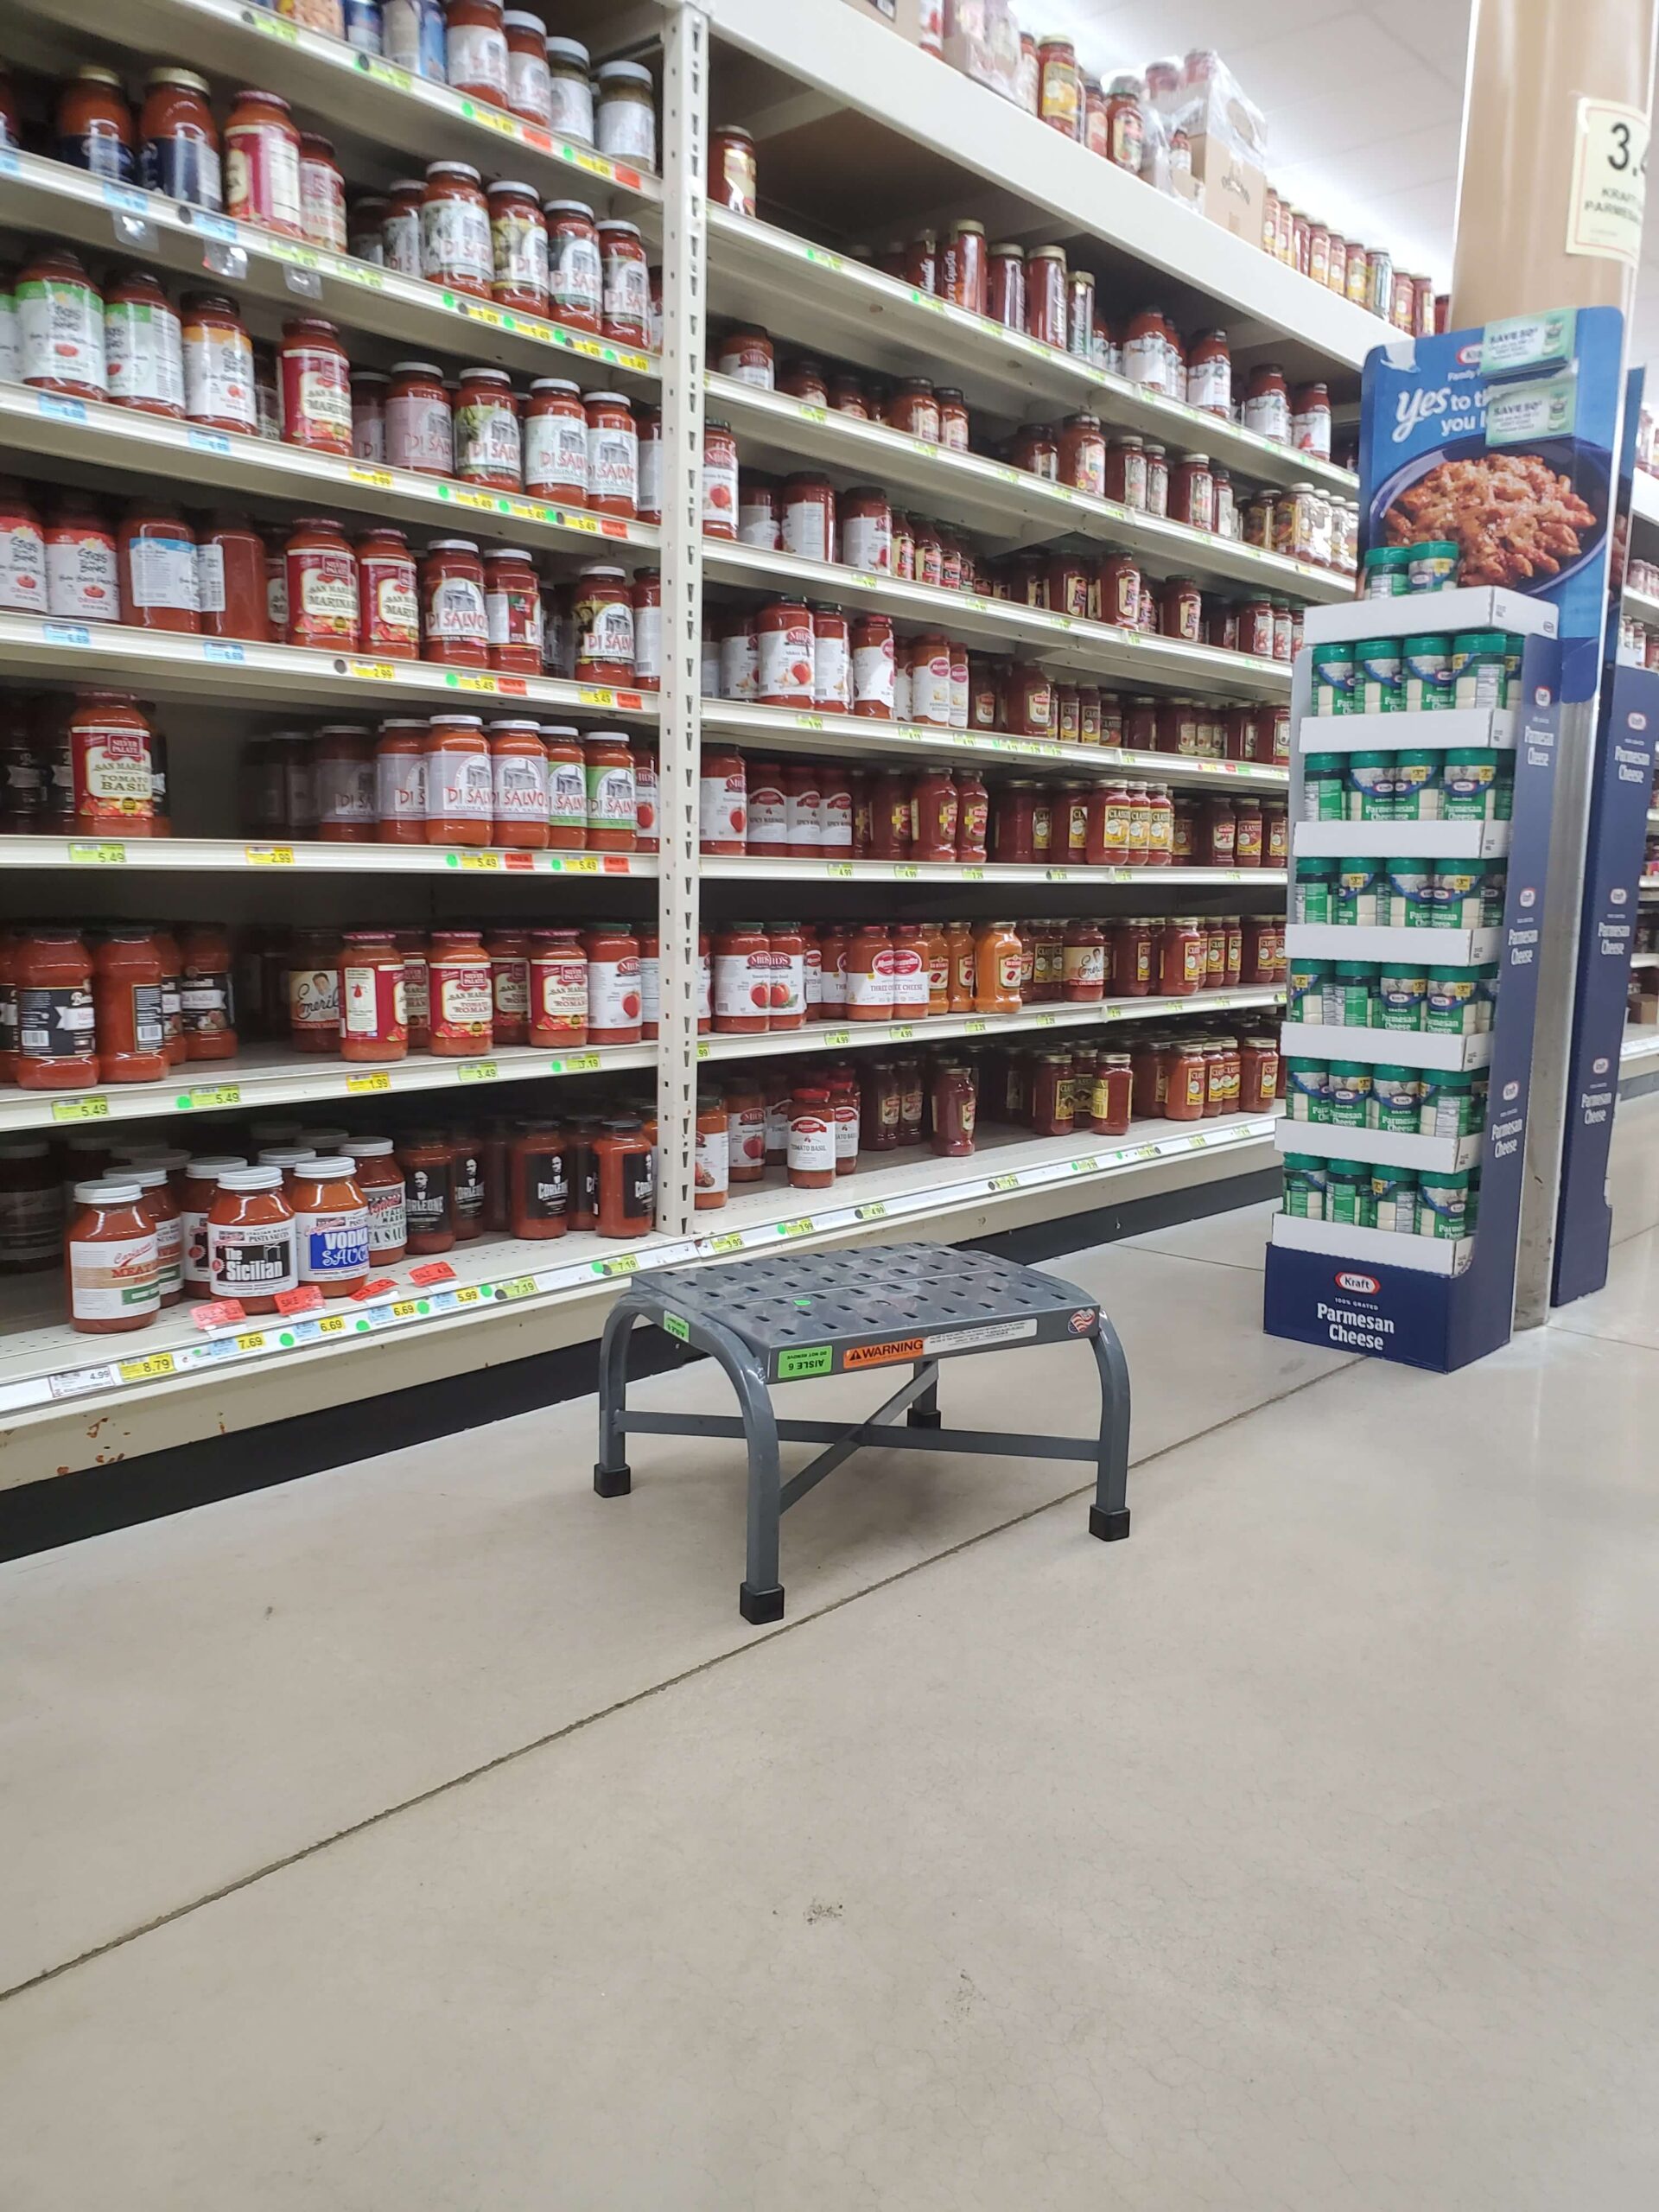 PSS perforated step stool on the ground near pasta sauce aisle in grocery store